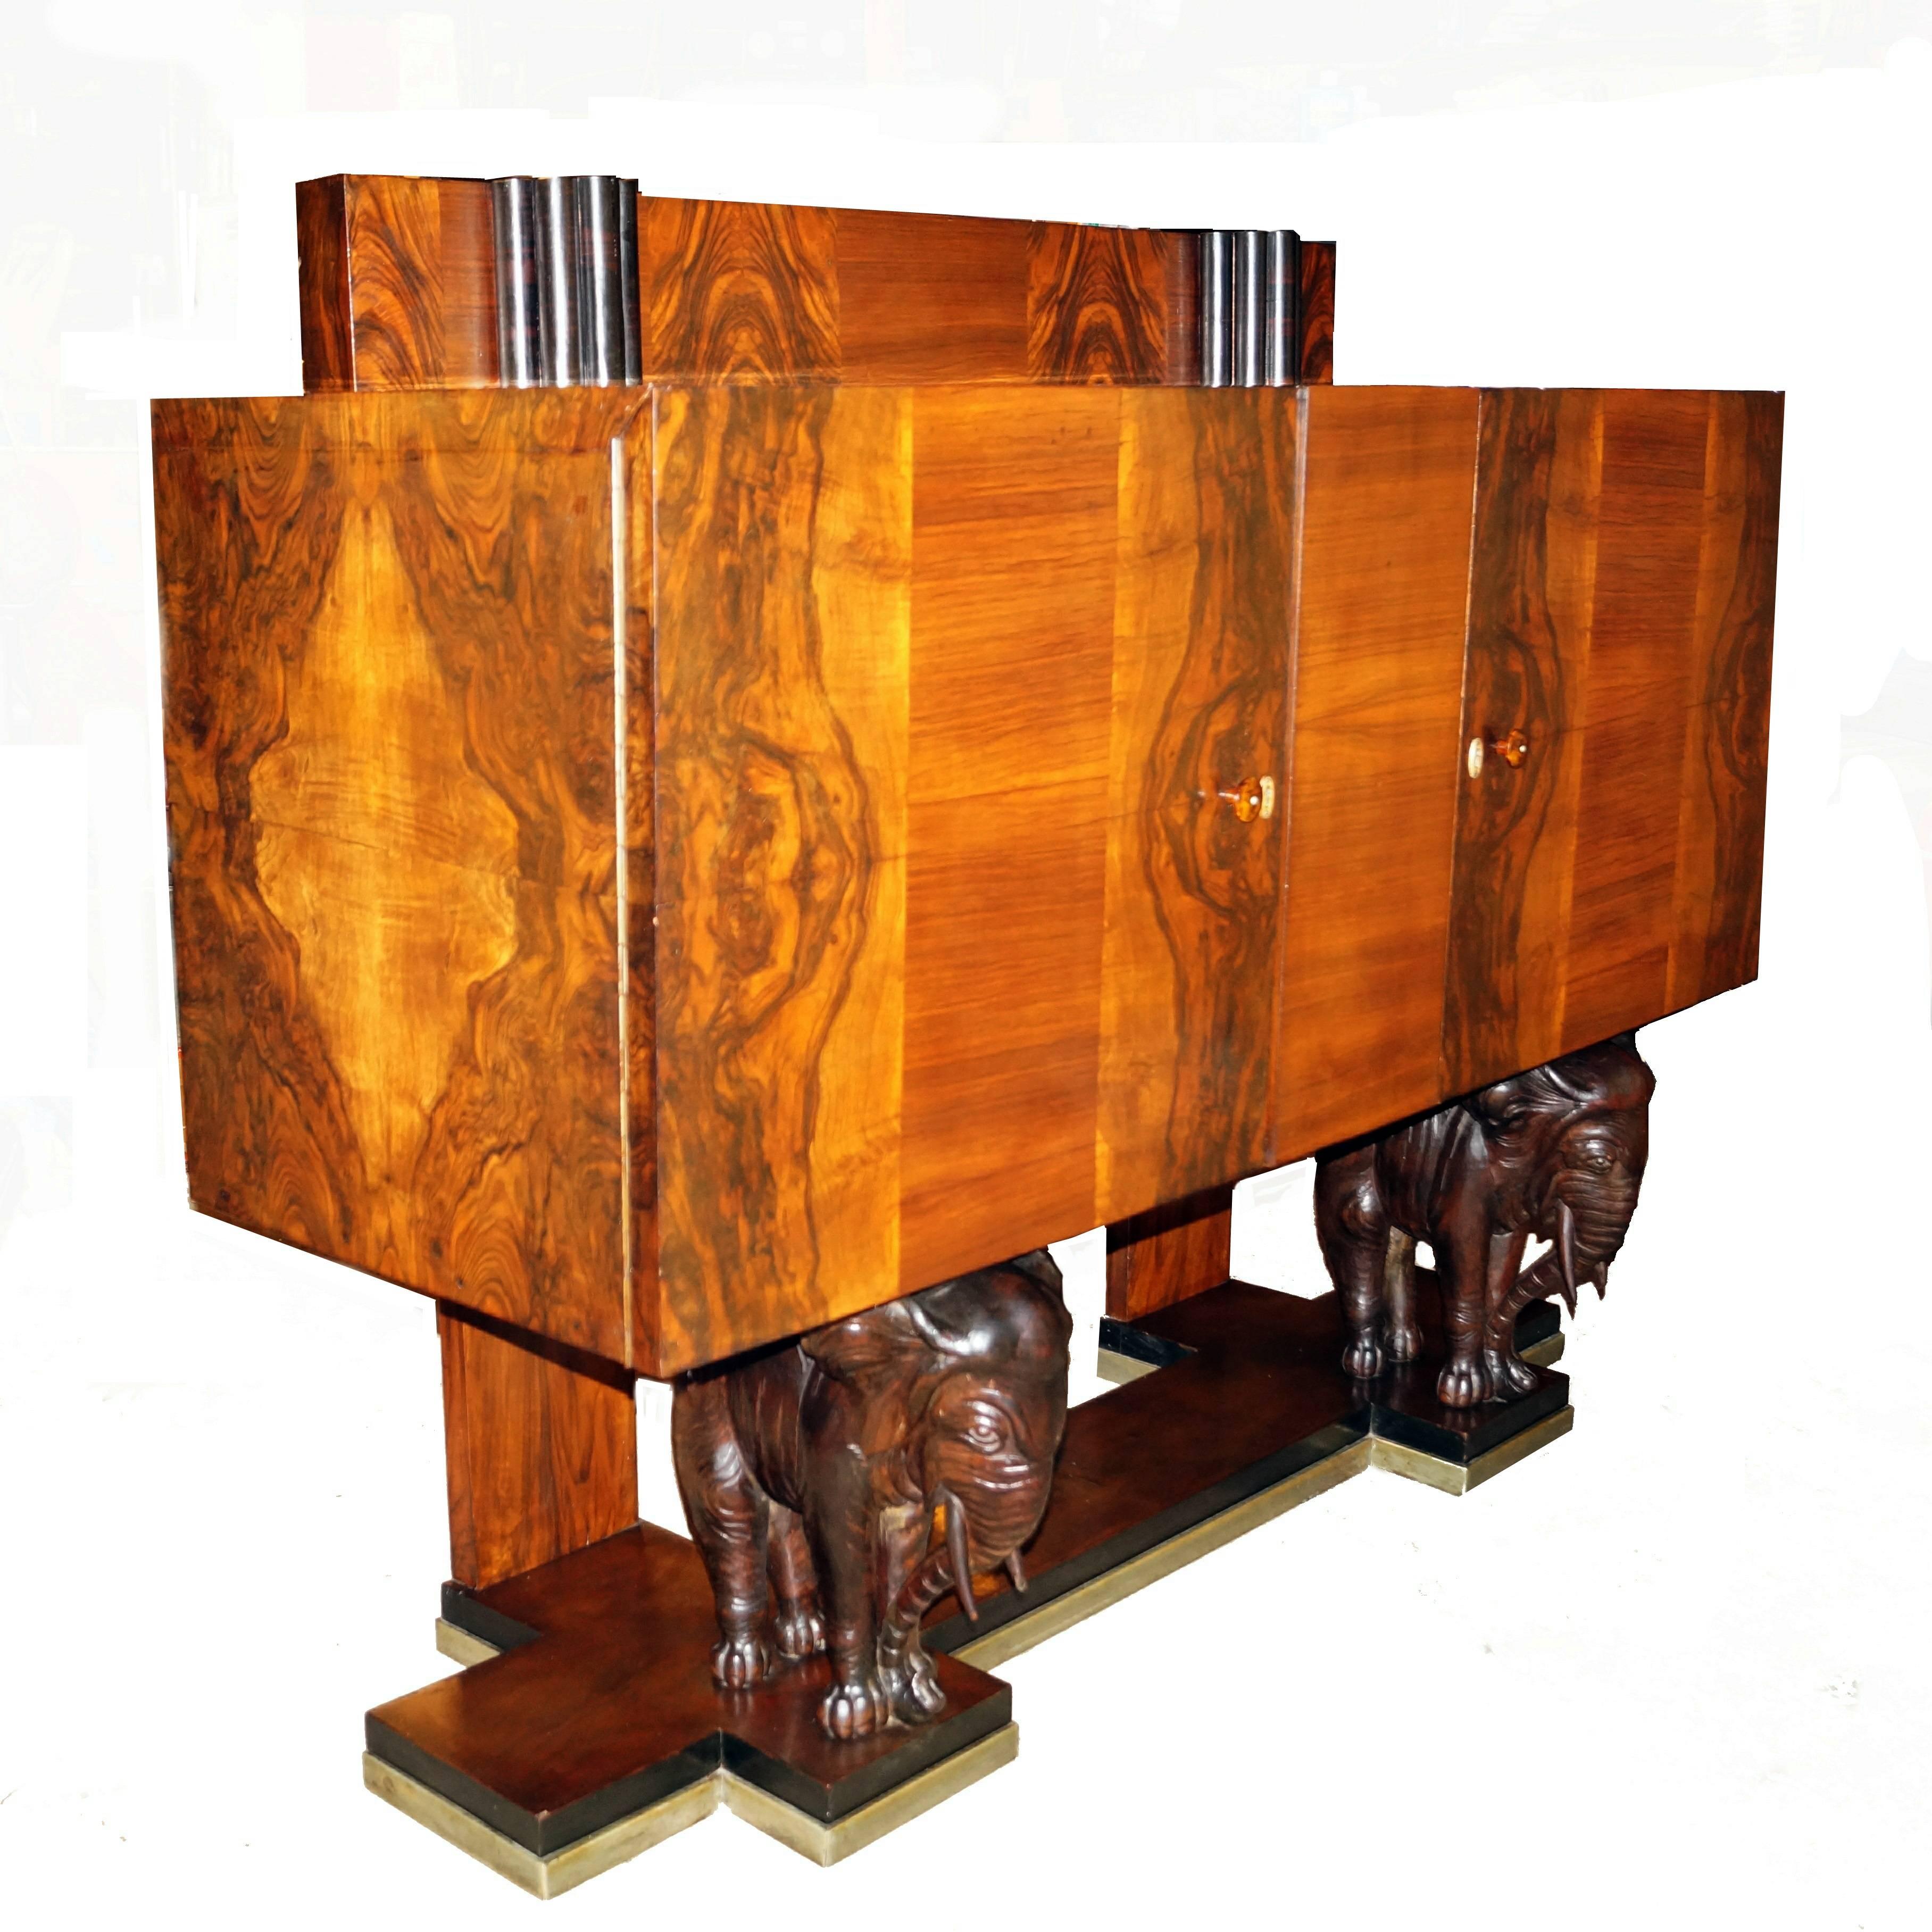 Figural Art Deco Burl Wood Carved Elephant Sideboard Buffet Credenza Console